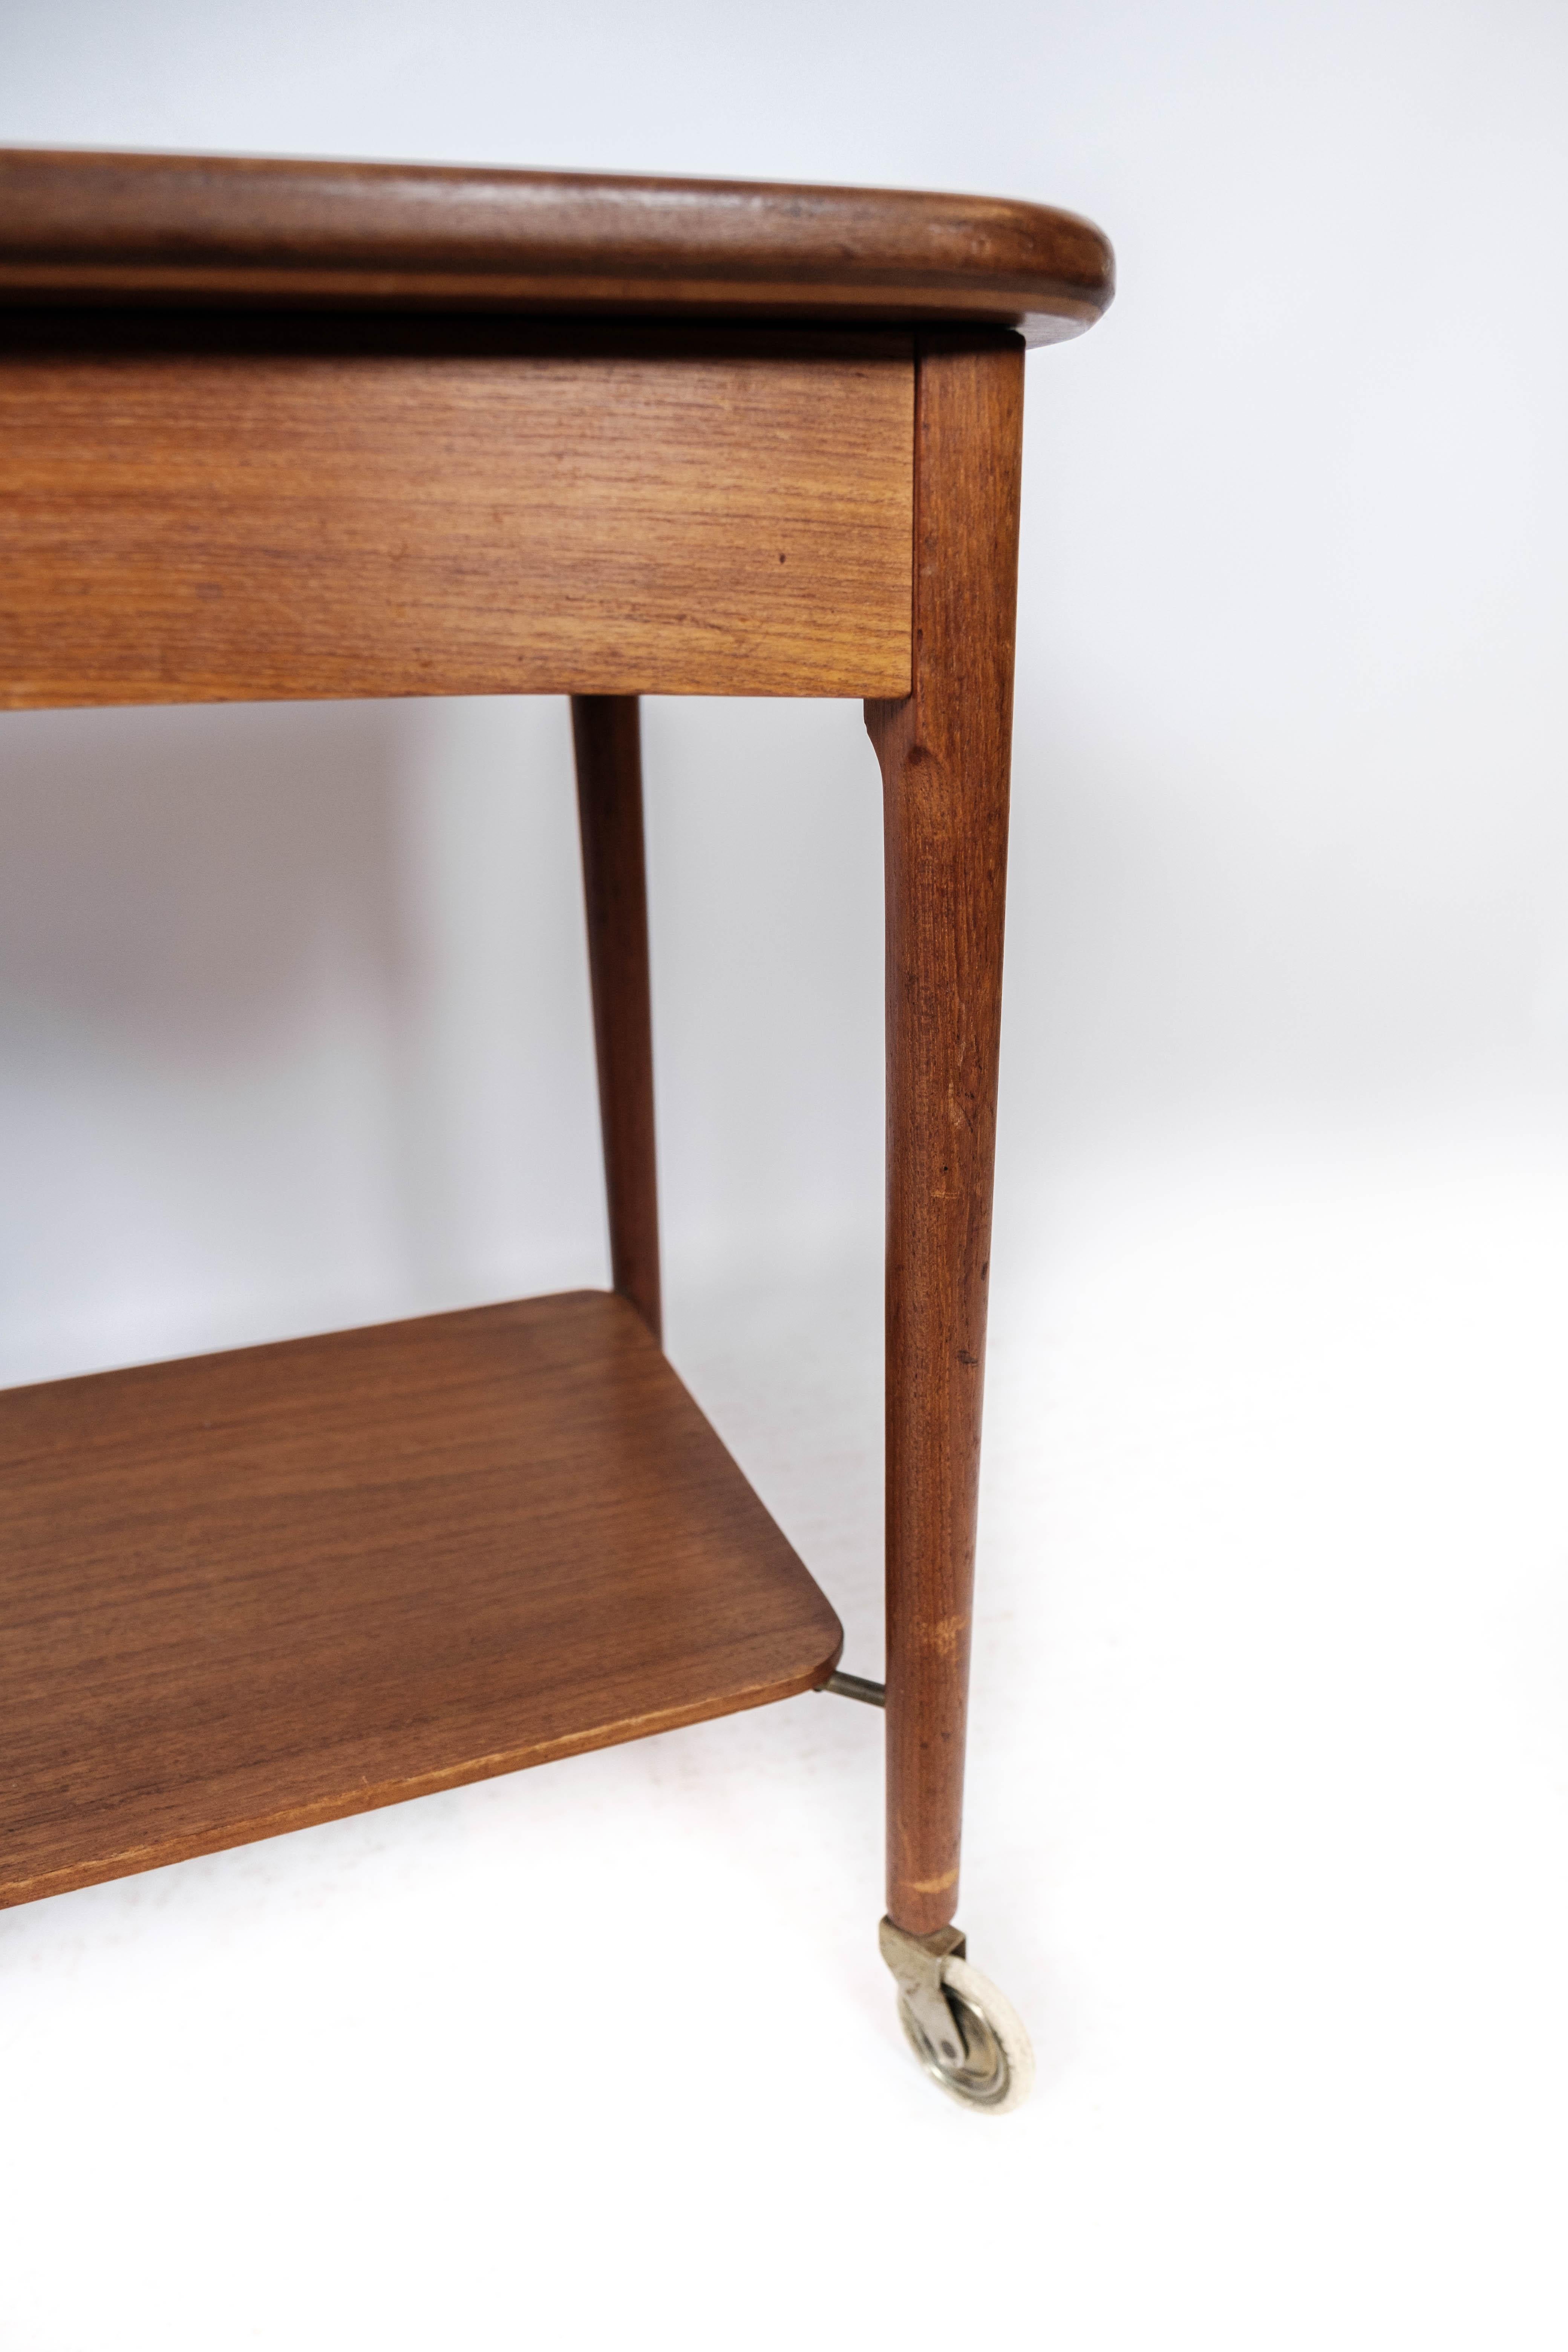 Mid-20th Century Side Table On Wheels Made In Teak Of Danish Design From 1960s For Sale